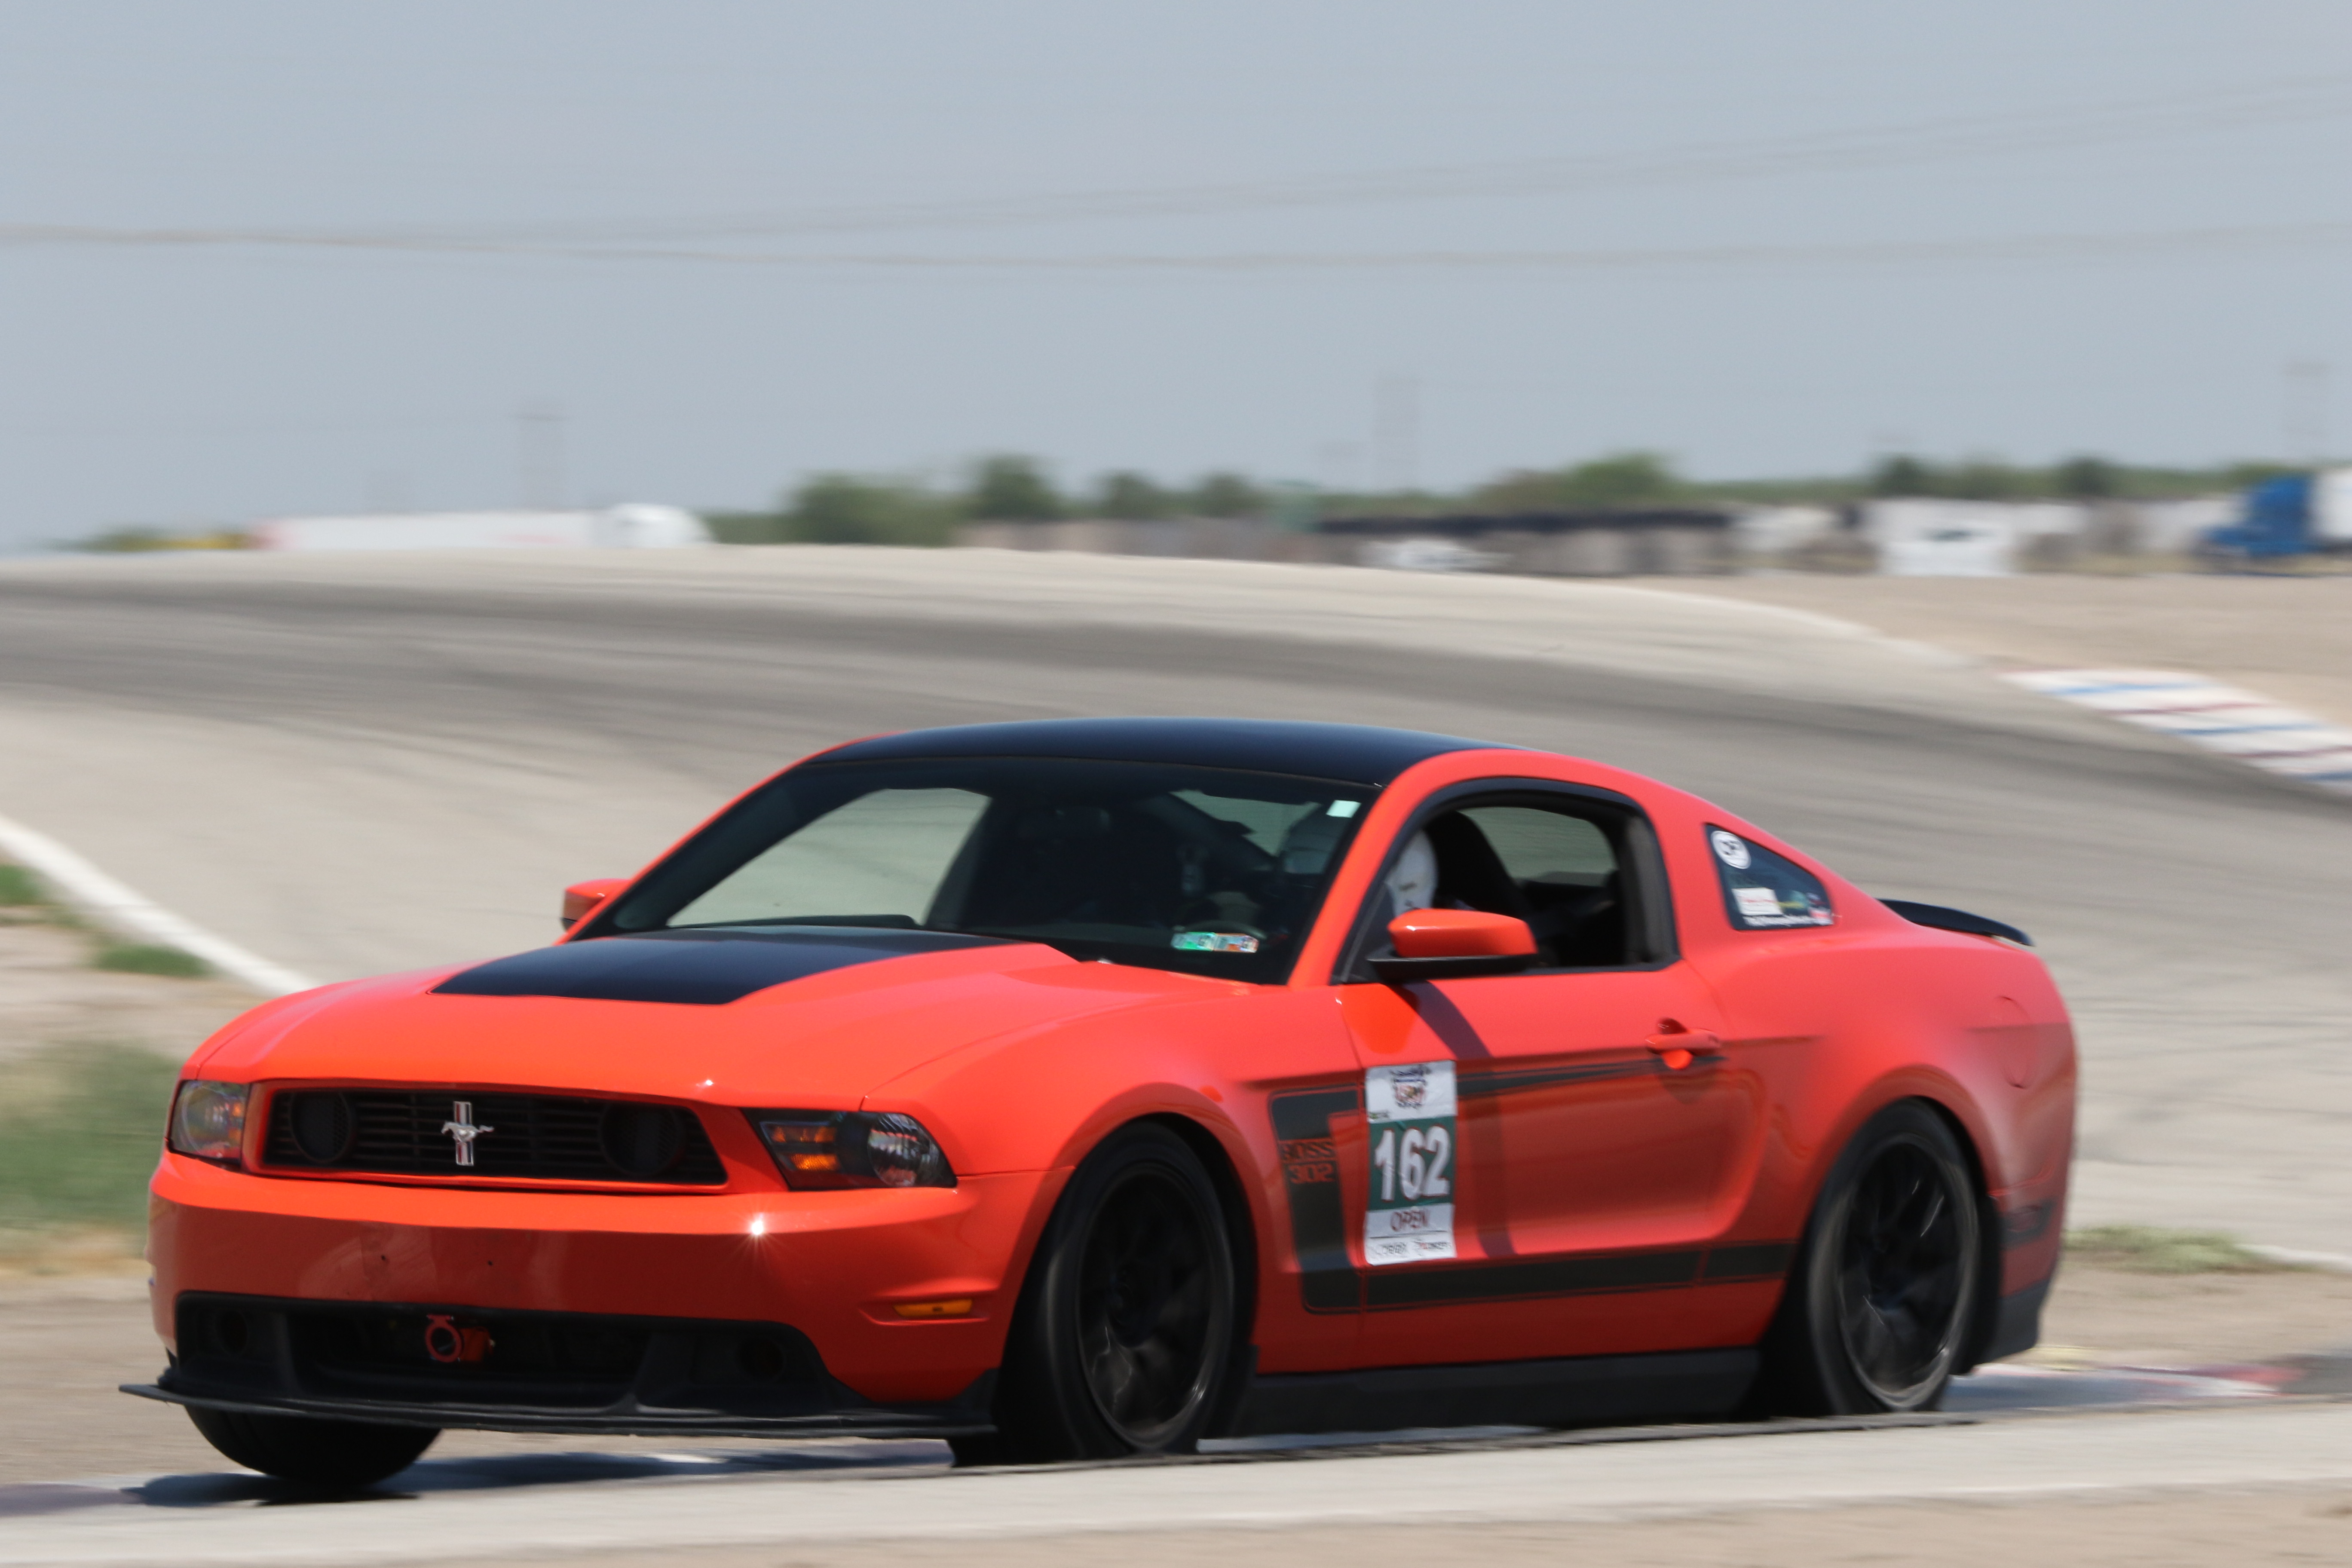 2012 Mustang
Boss_302 HPDE/Track -  (Track and Touge Boss)